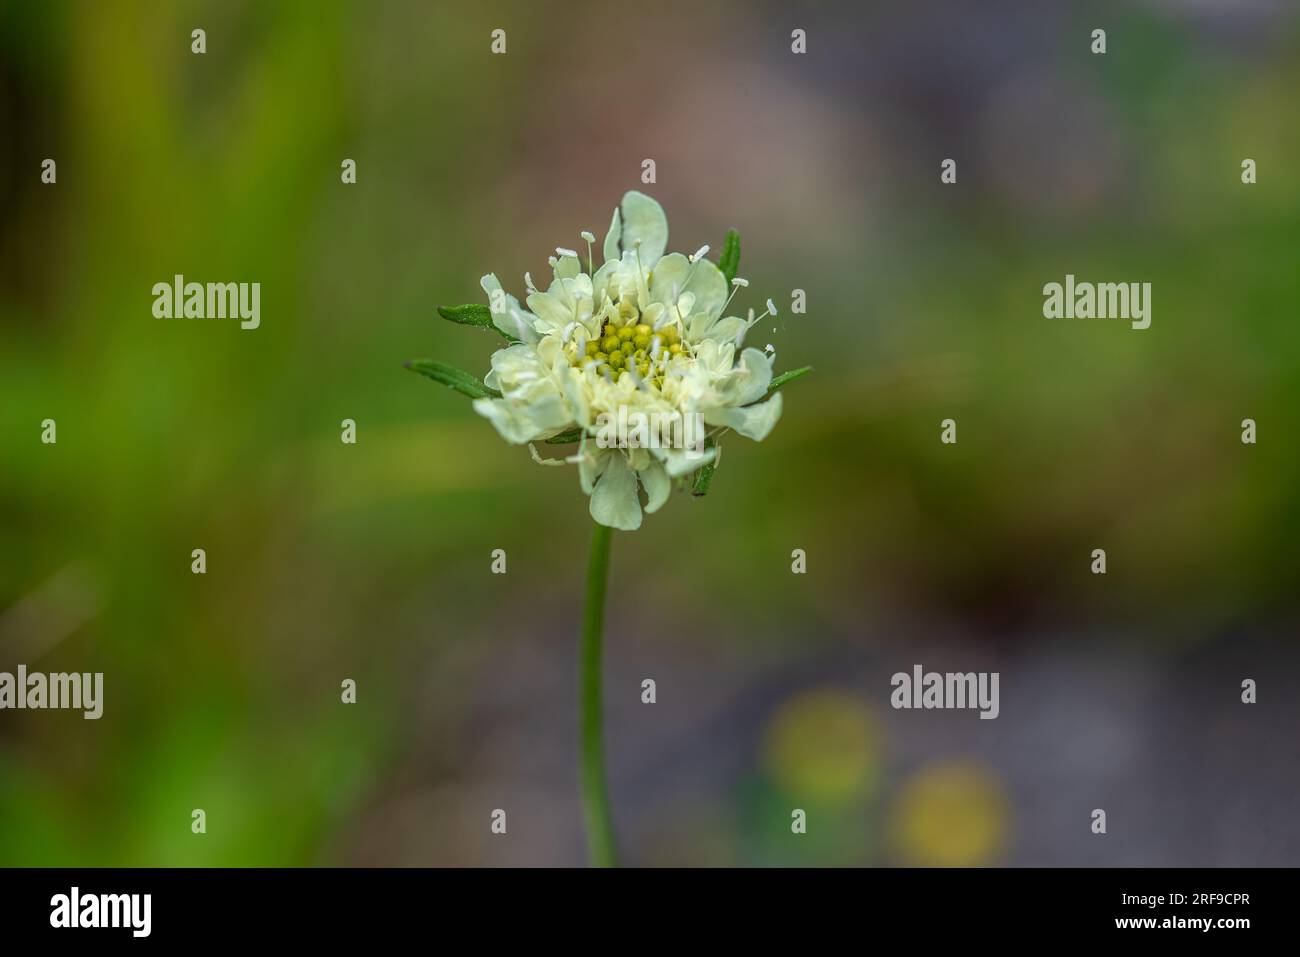 One white small blooming flower on green background. Stock Photo